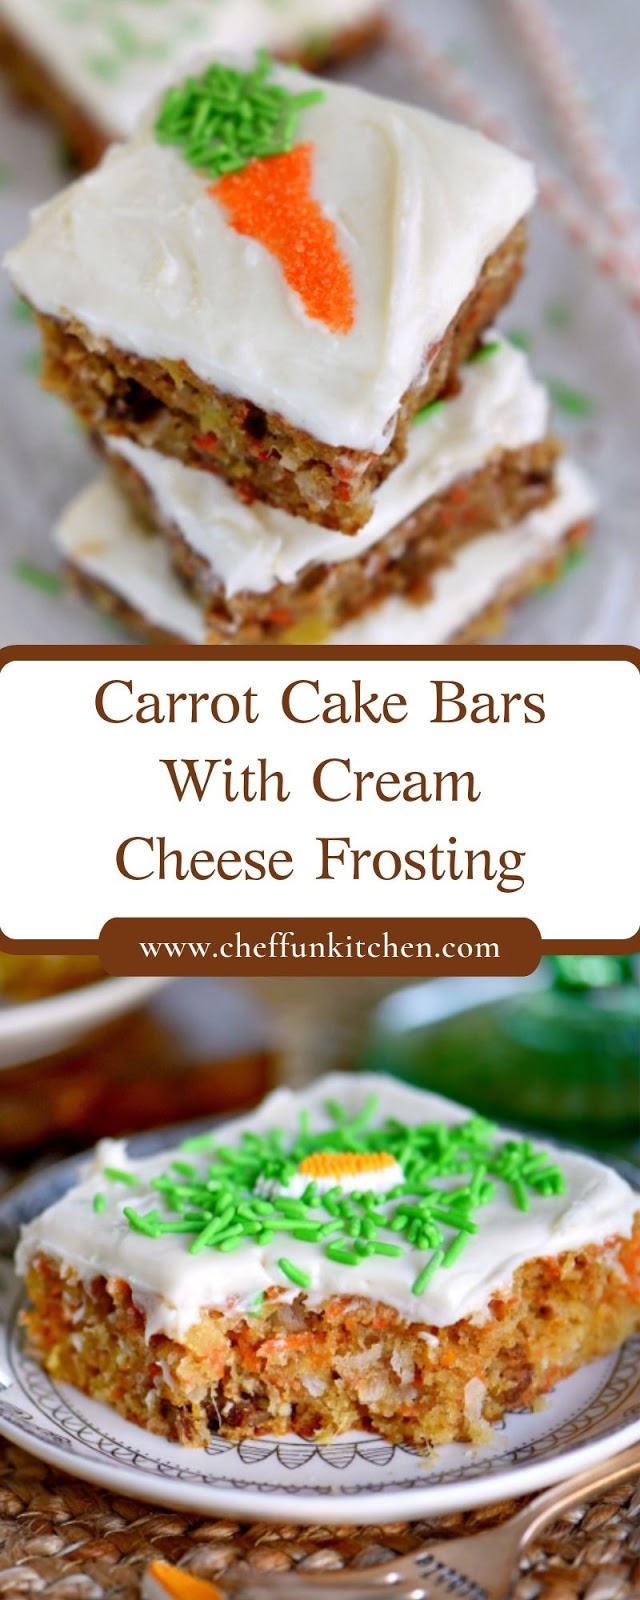 Carrot Cake Bars With Cream Cheese Frosting